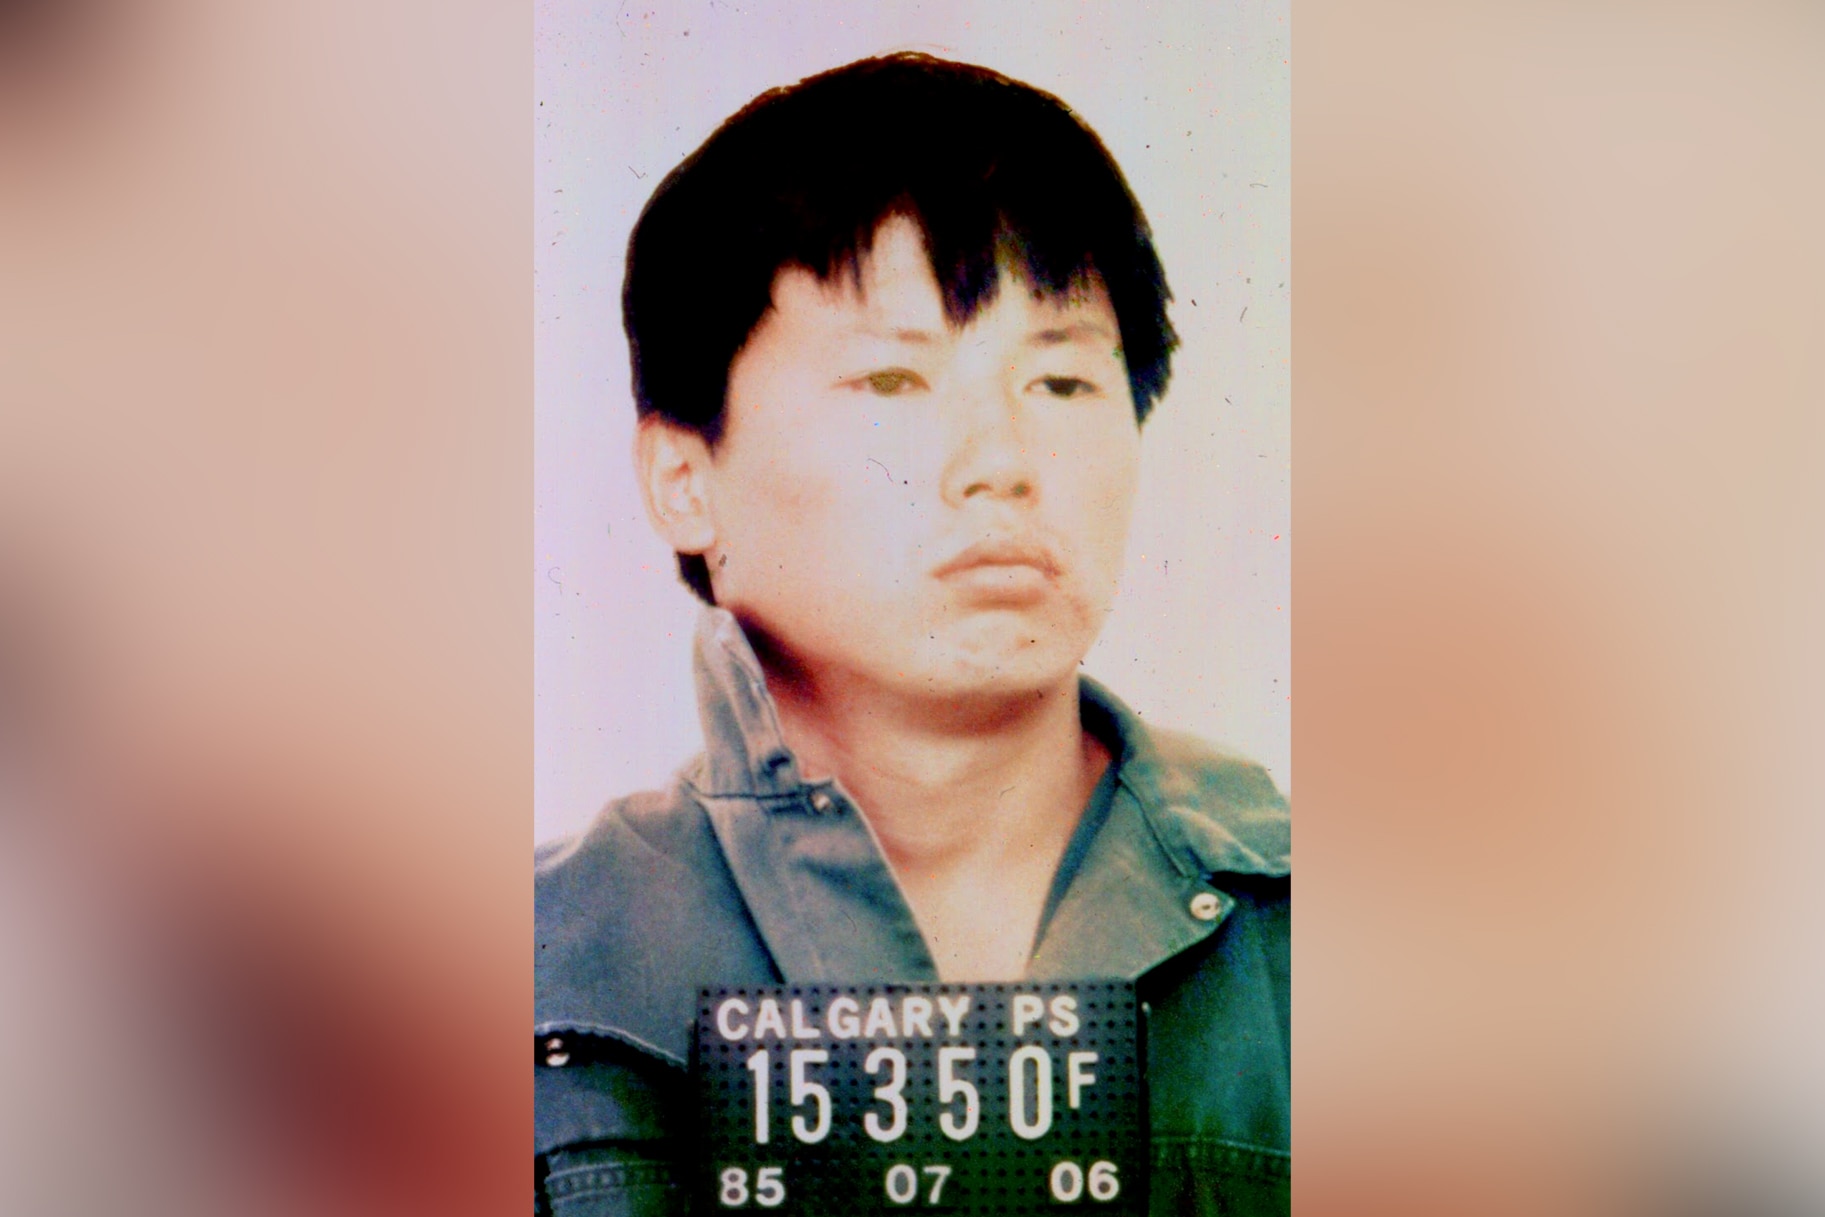 Charles Ng featured in Manifesto Of Serial Killer